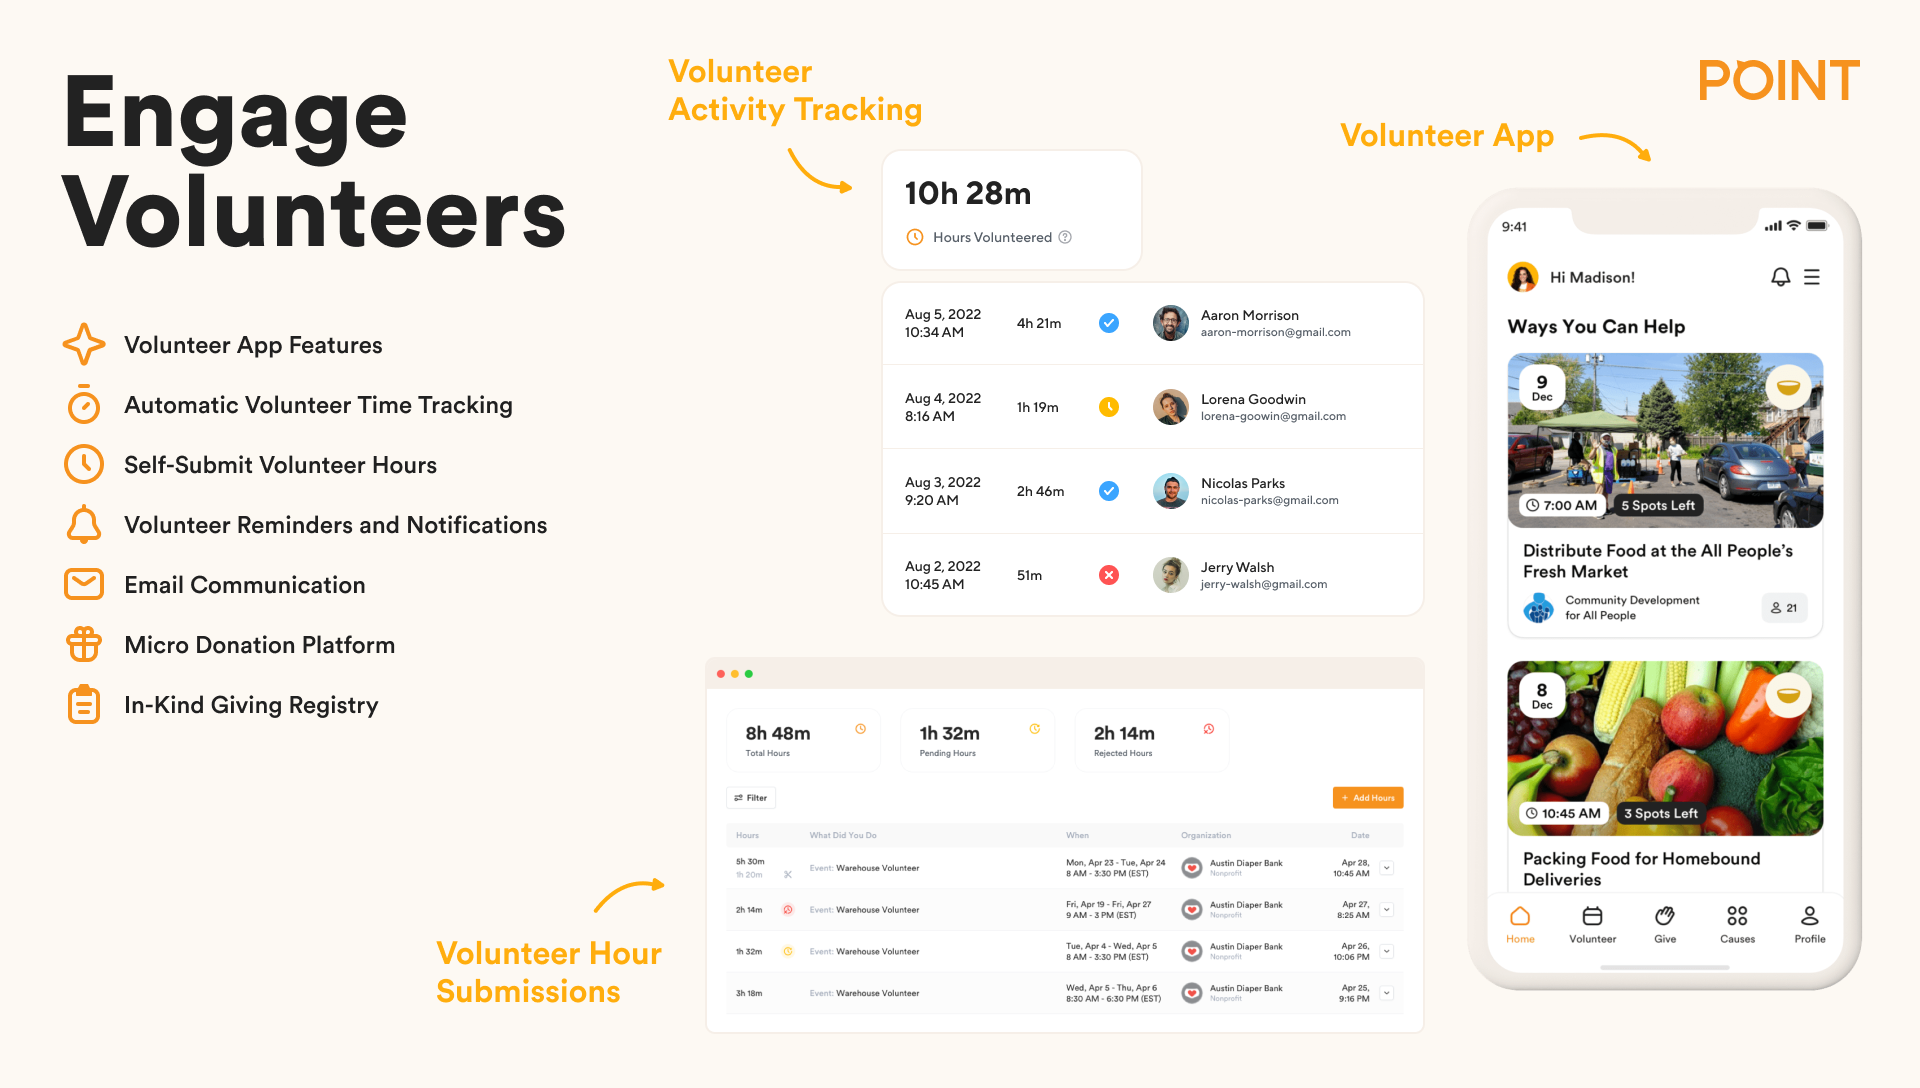 Engage volunteers with a mobile app, time tracking, and volunteer hour self submission.